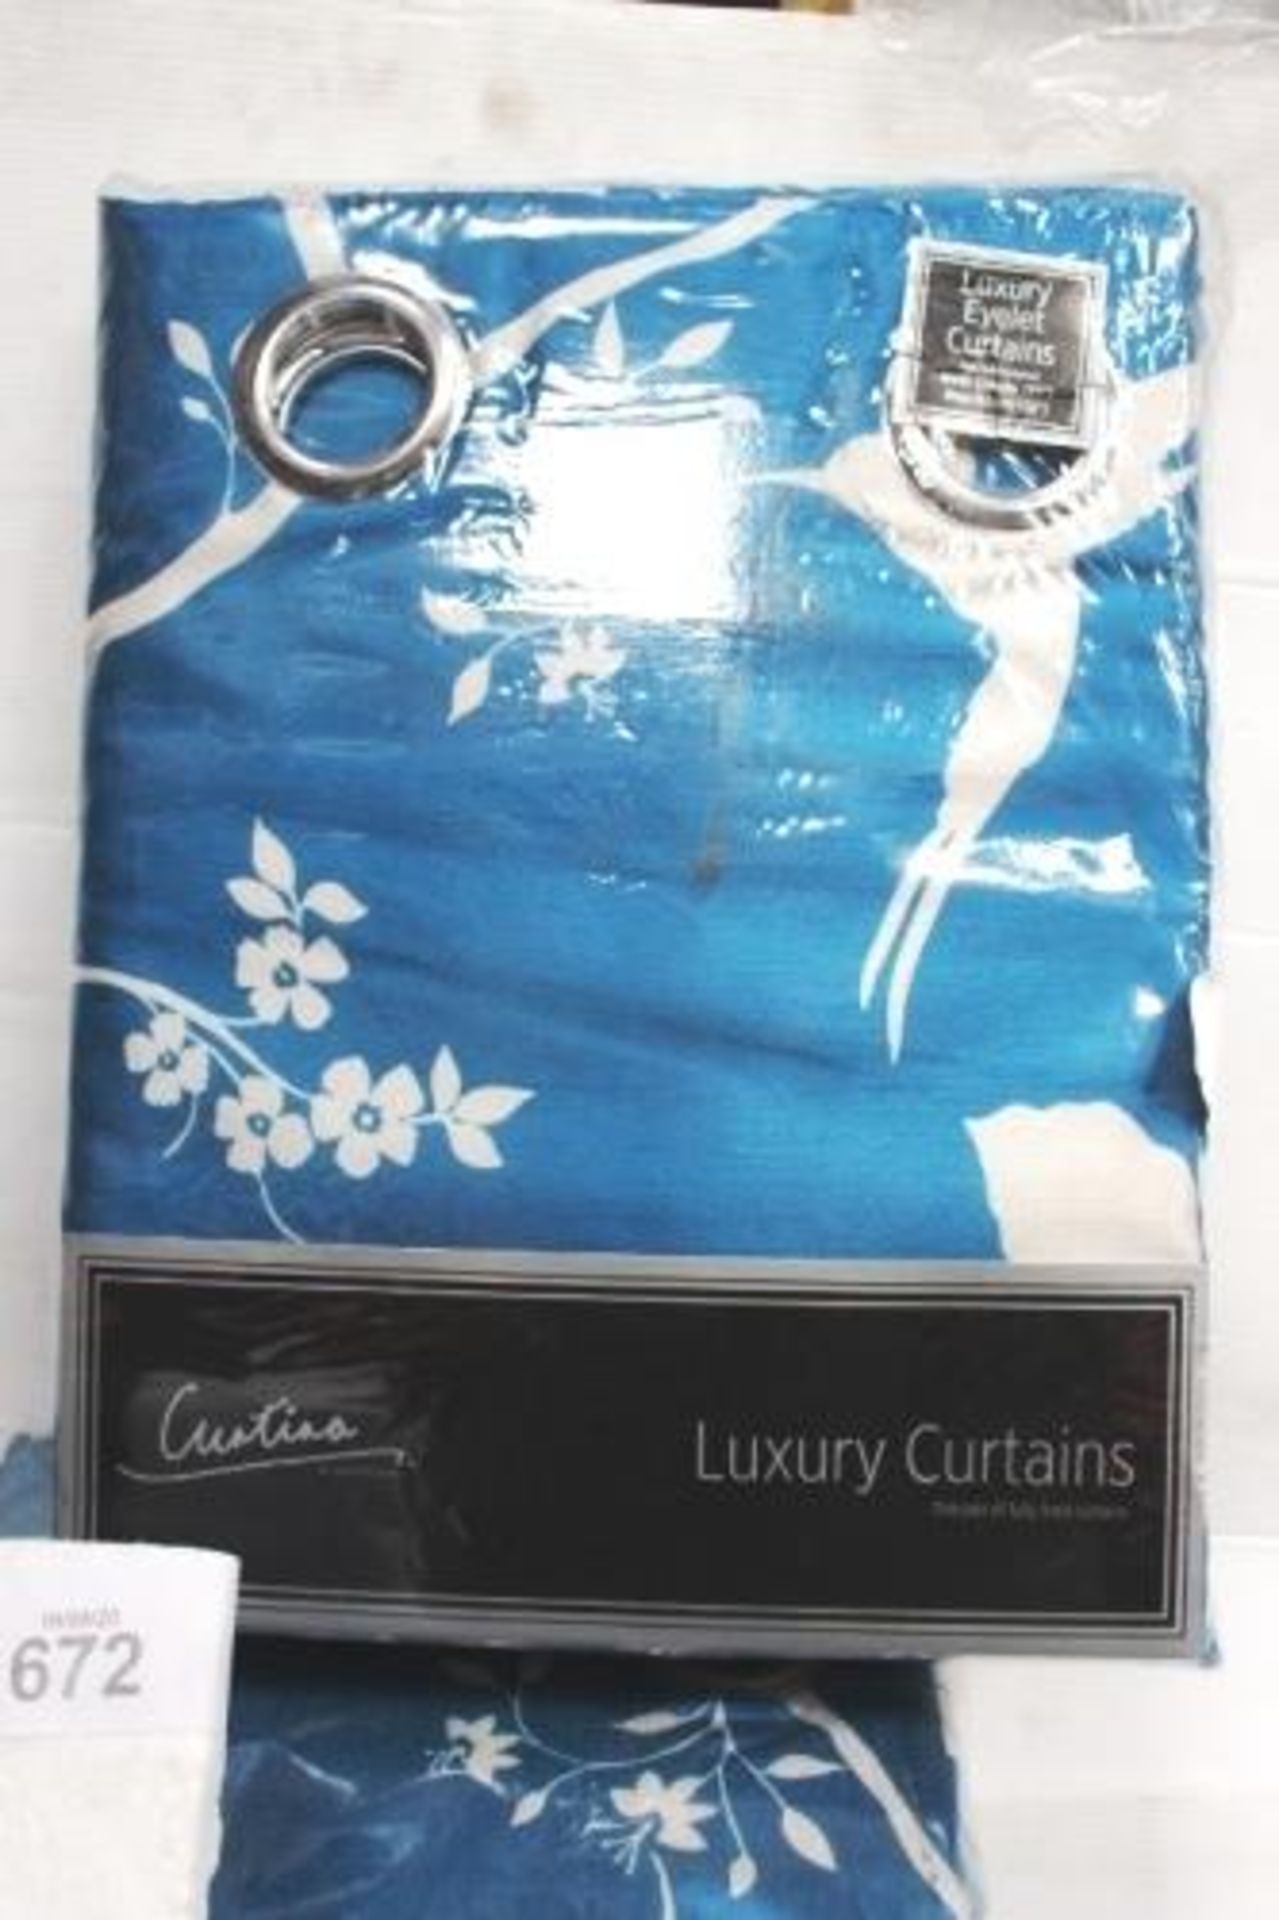 4 x pairs of Rosenthal Curtina teal lined eyelet silhouette floral curtains, size 229 x 182cm - - Image 2 of 3